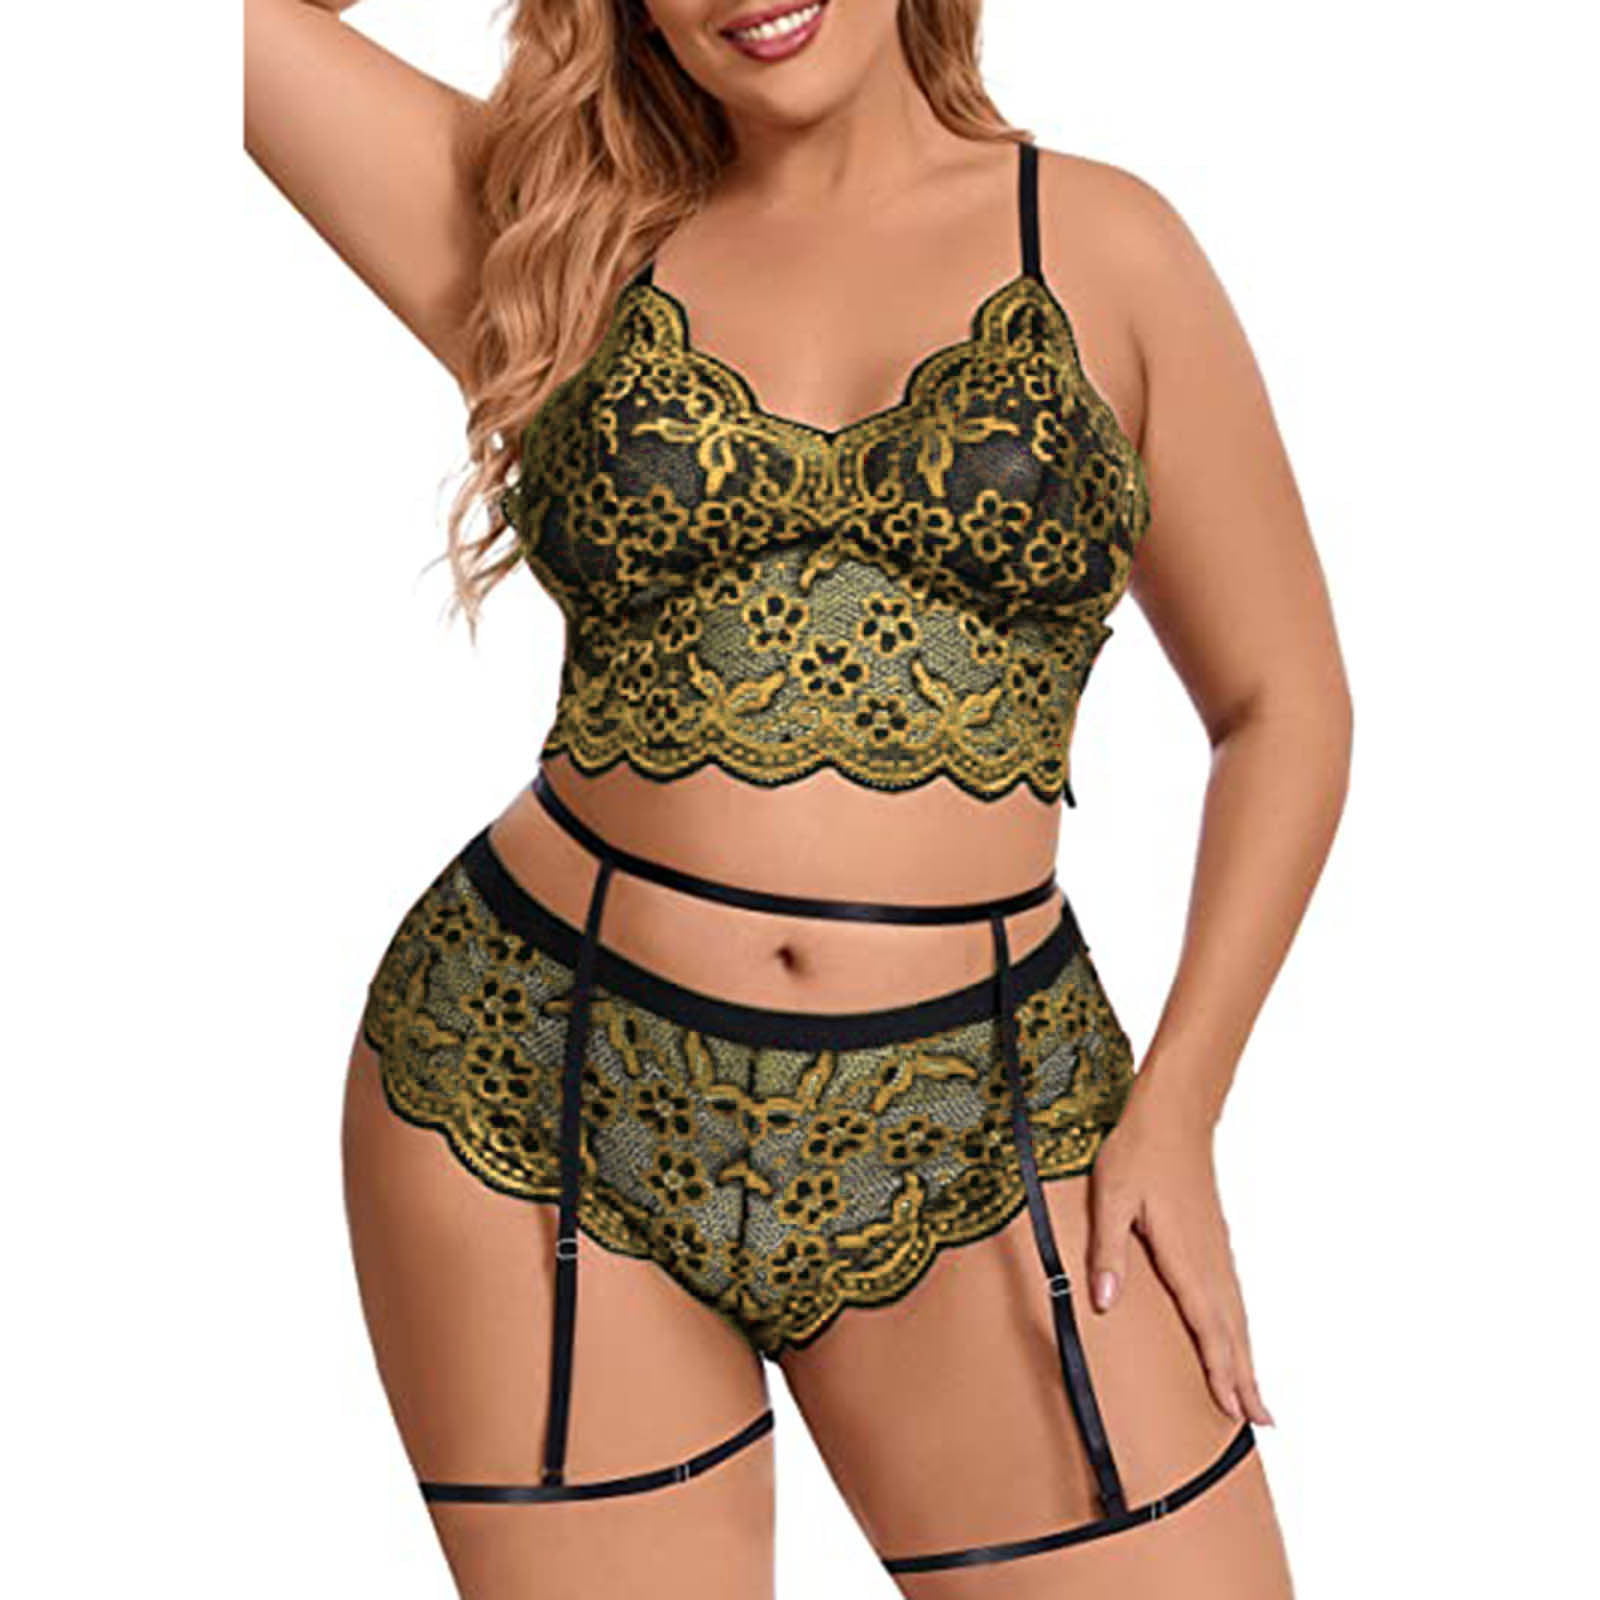 Tagold Womens Plus Size Sexy lingerie,Plus Size Sexy Women Lace Hollow Out  Babydoll Underwear Sleepwear Intimates Thong With Garter Panty Lingerie Set  